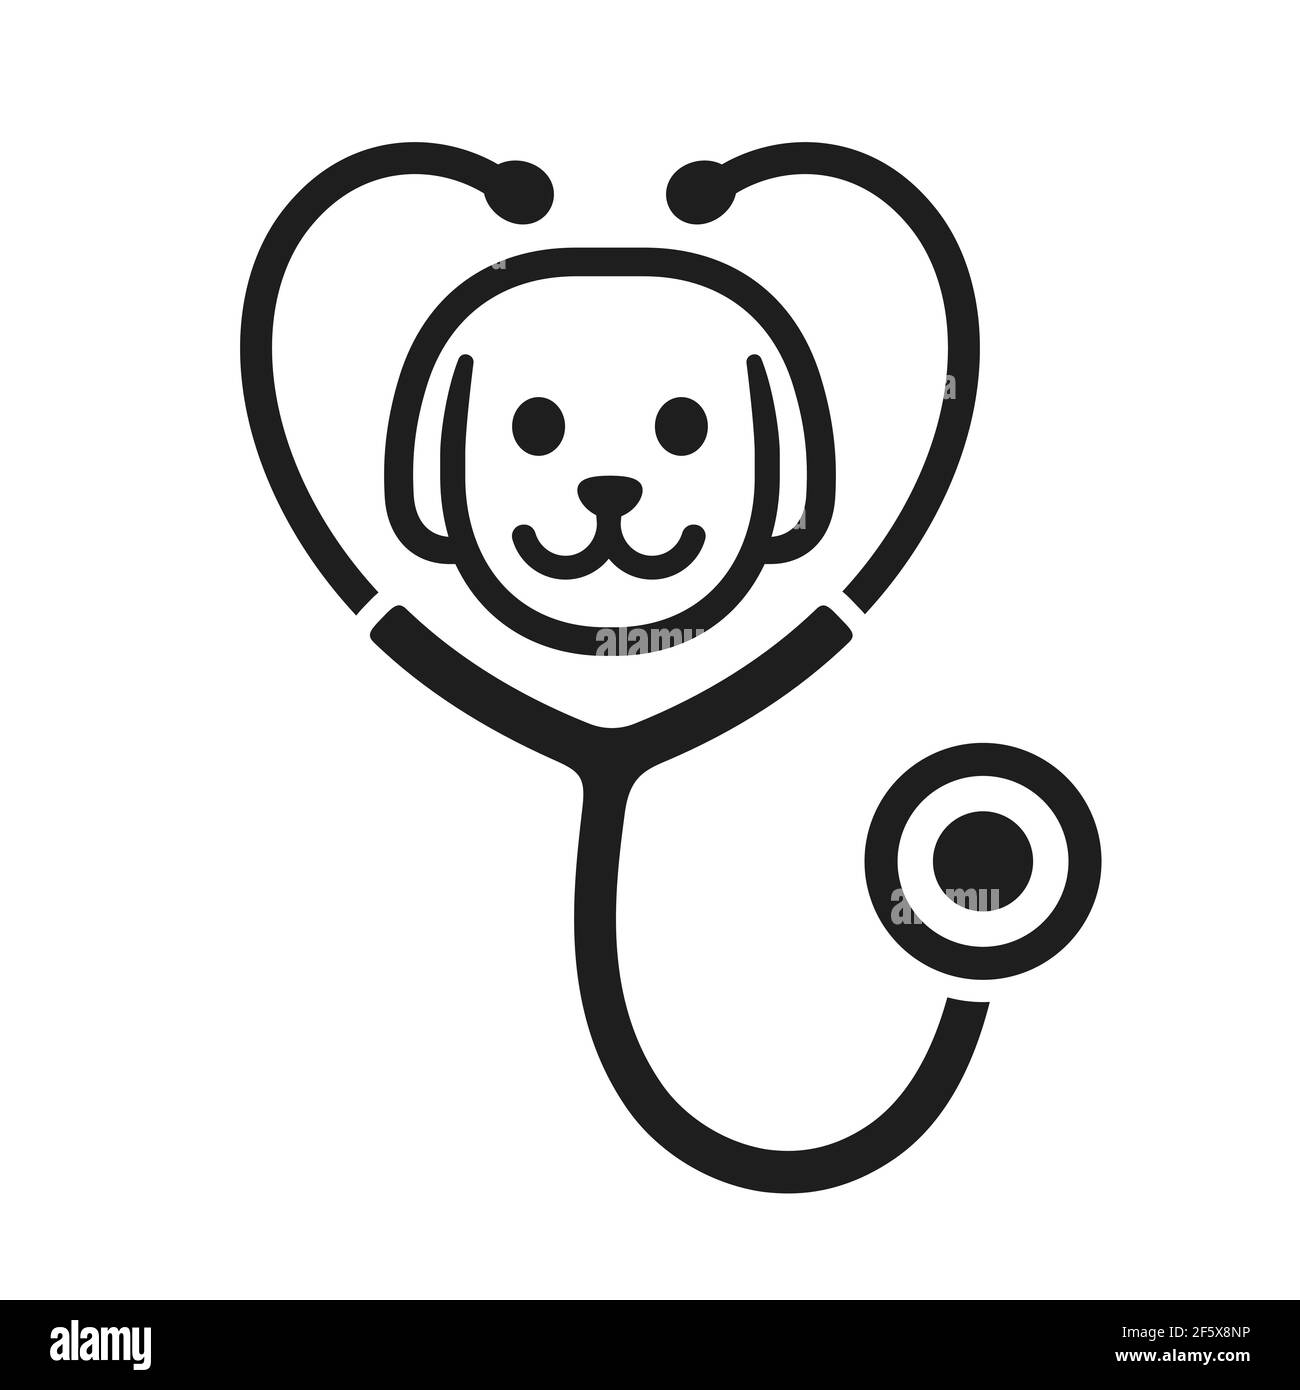 Stethoscope silhouette with dog face icon. Veterinary clinic logo, isolated vector illustration. Stock Vector